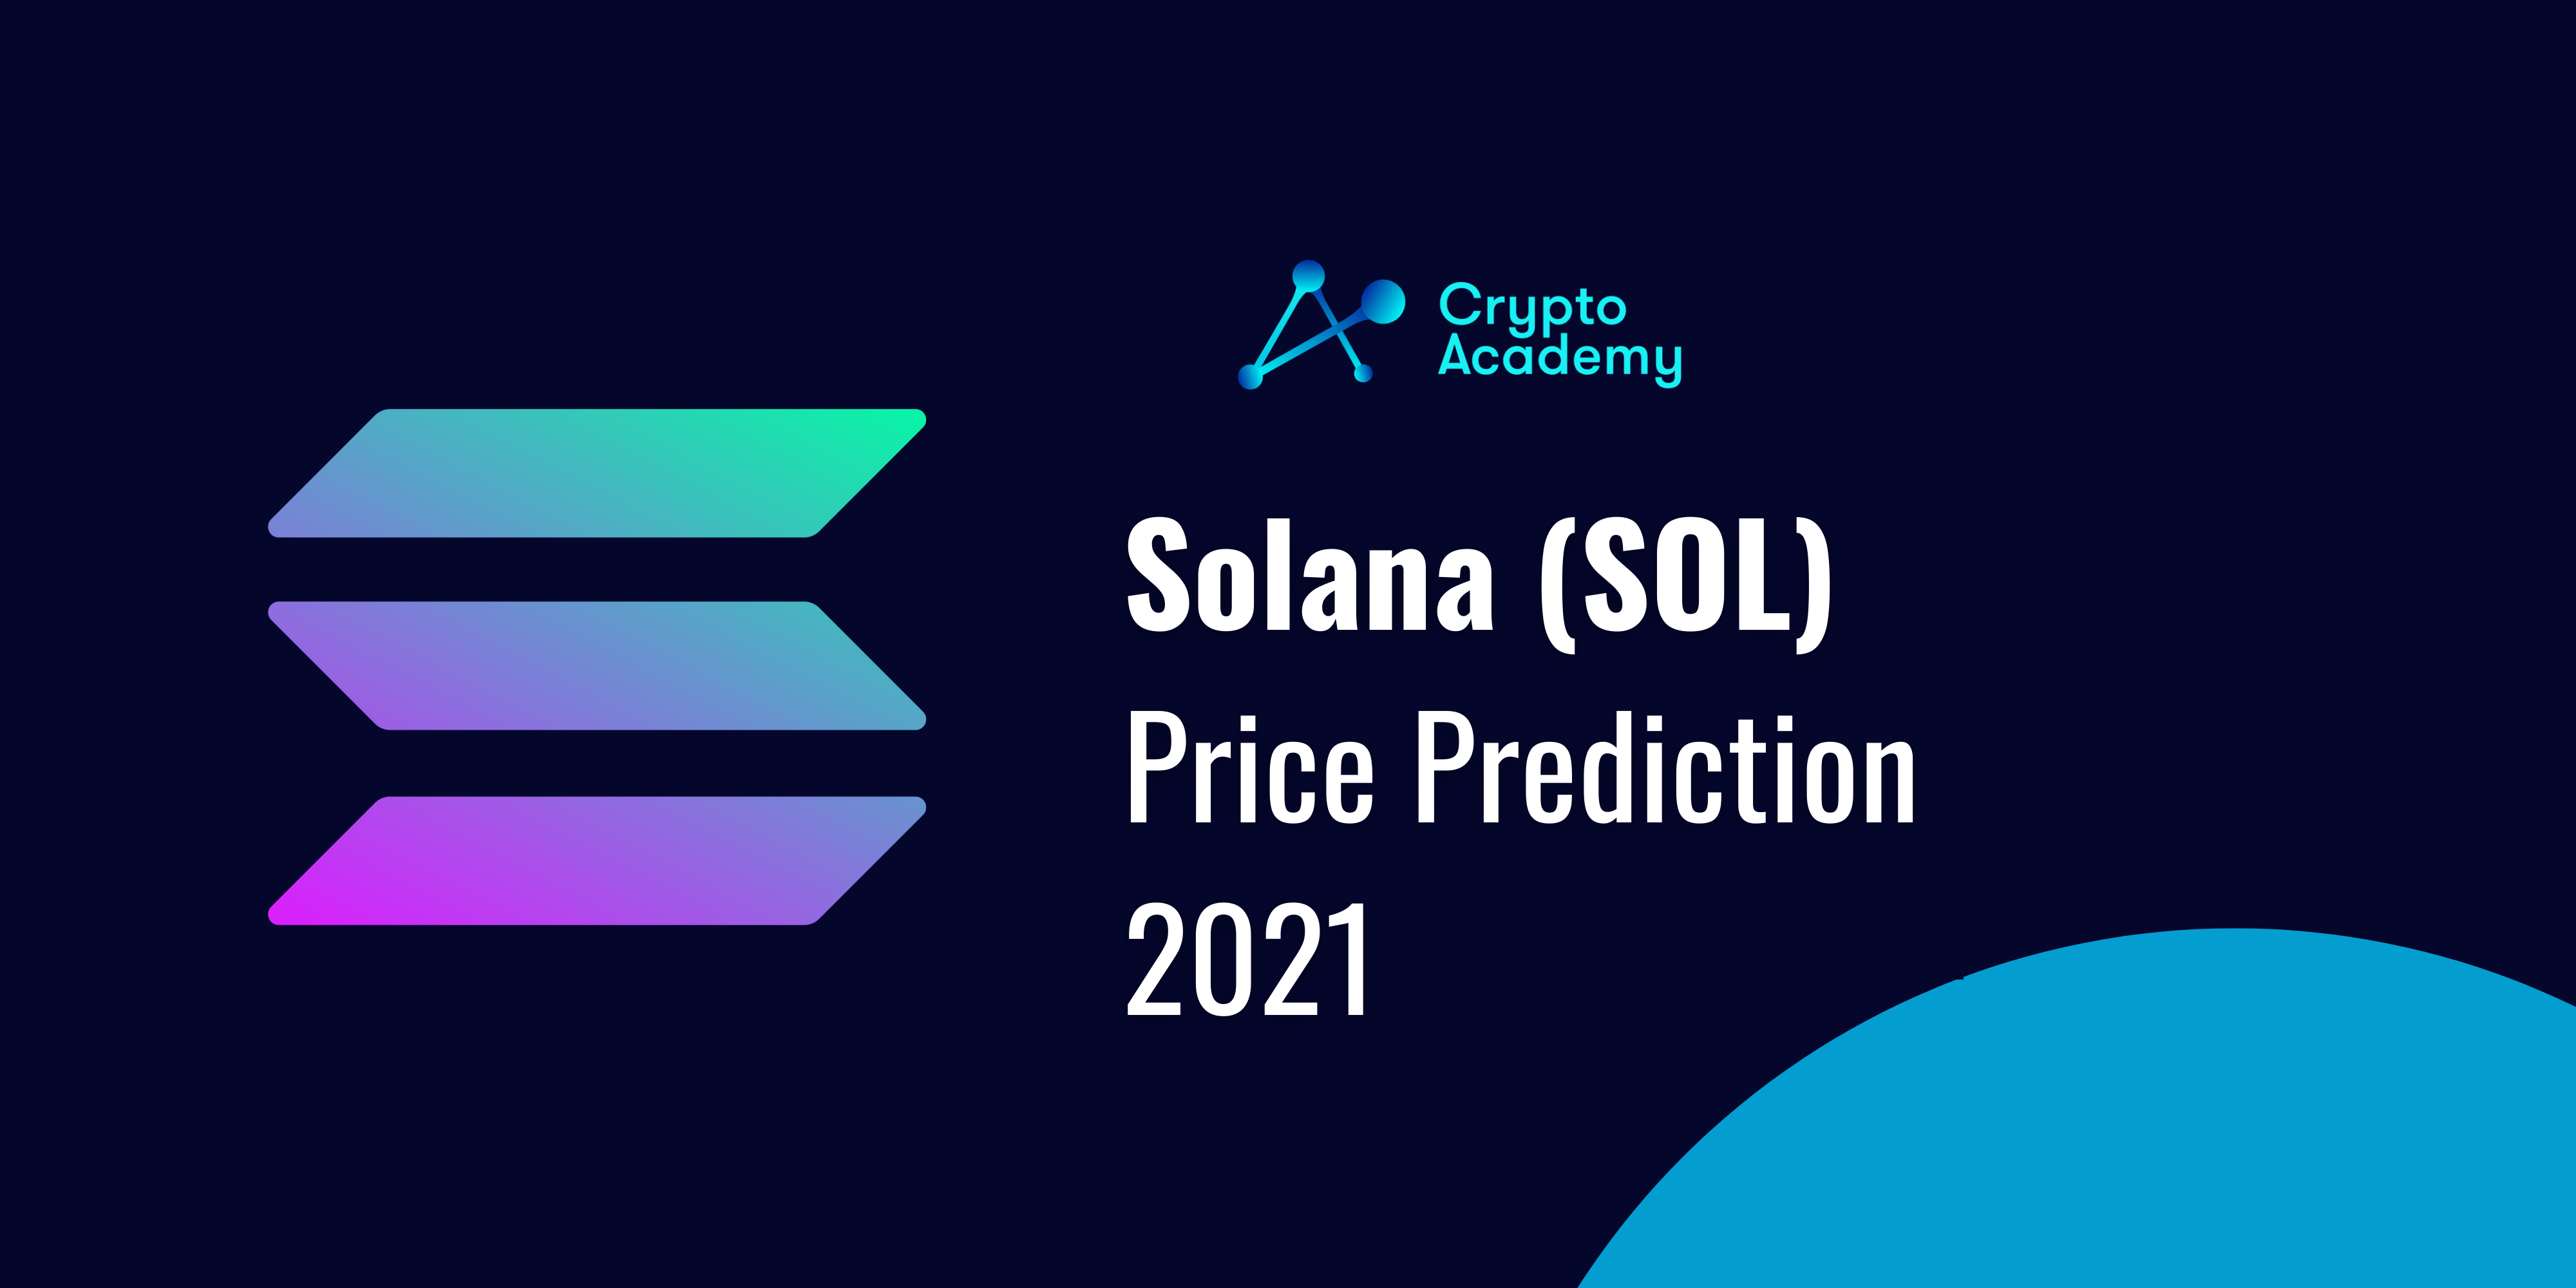 Solana (SOL) Price Prediction 2021 and Beyond – Is SOL a Good Investment?